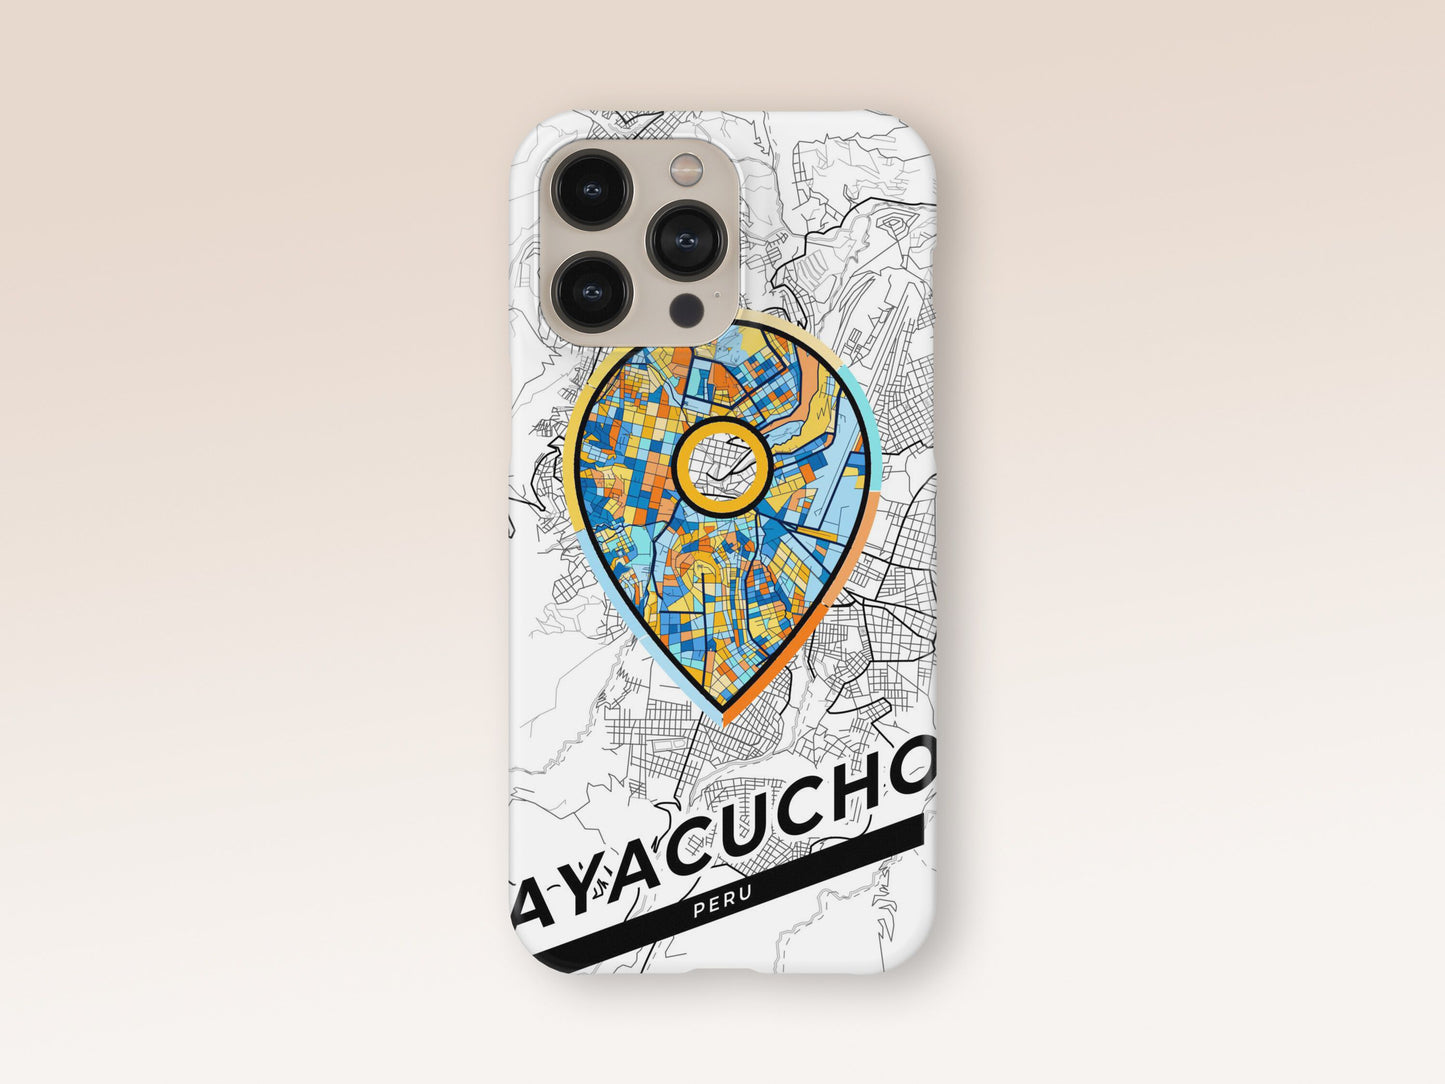 Ayacucho Peru slim phone case with colorful icon. Birthday, wedding or housewarming gift. Couple match cases. 1